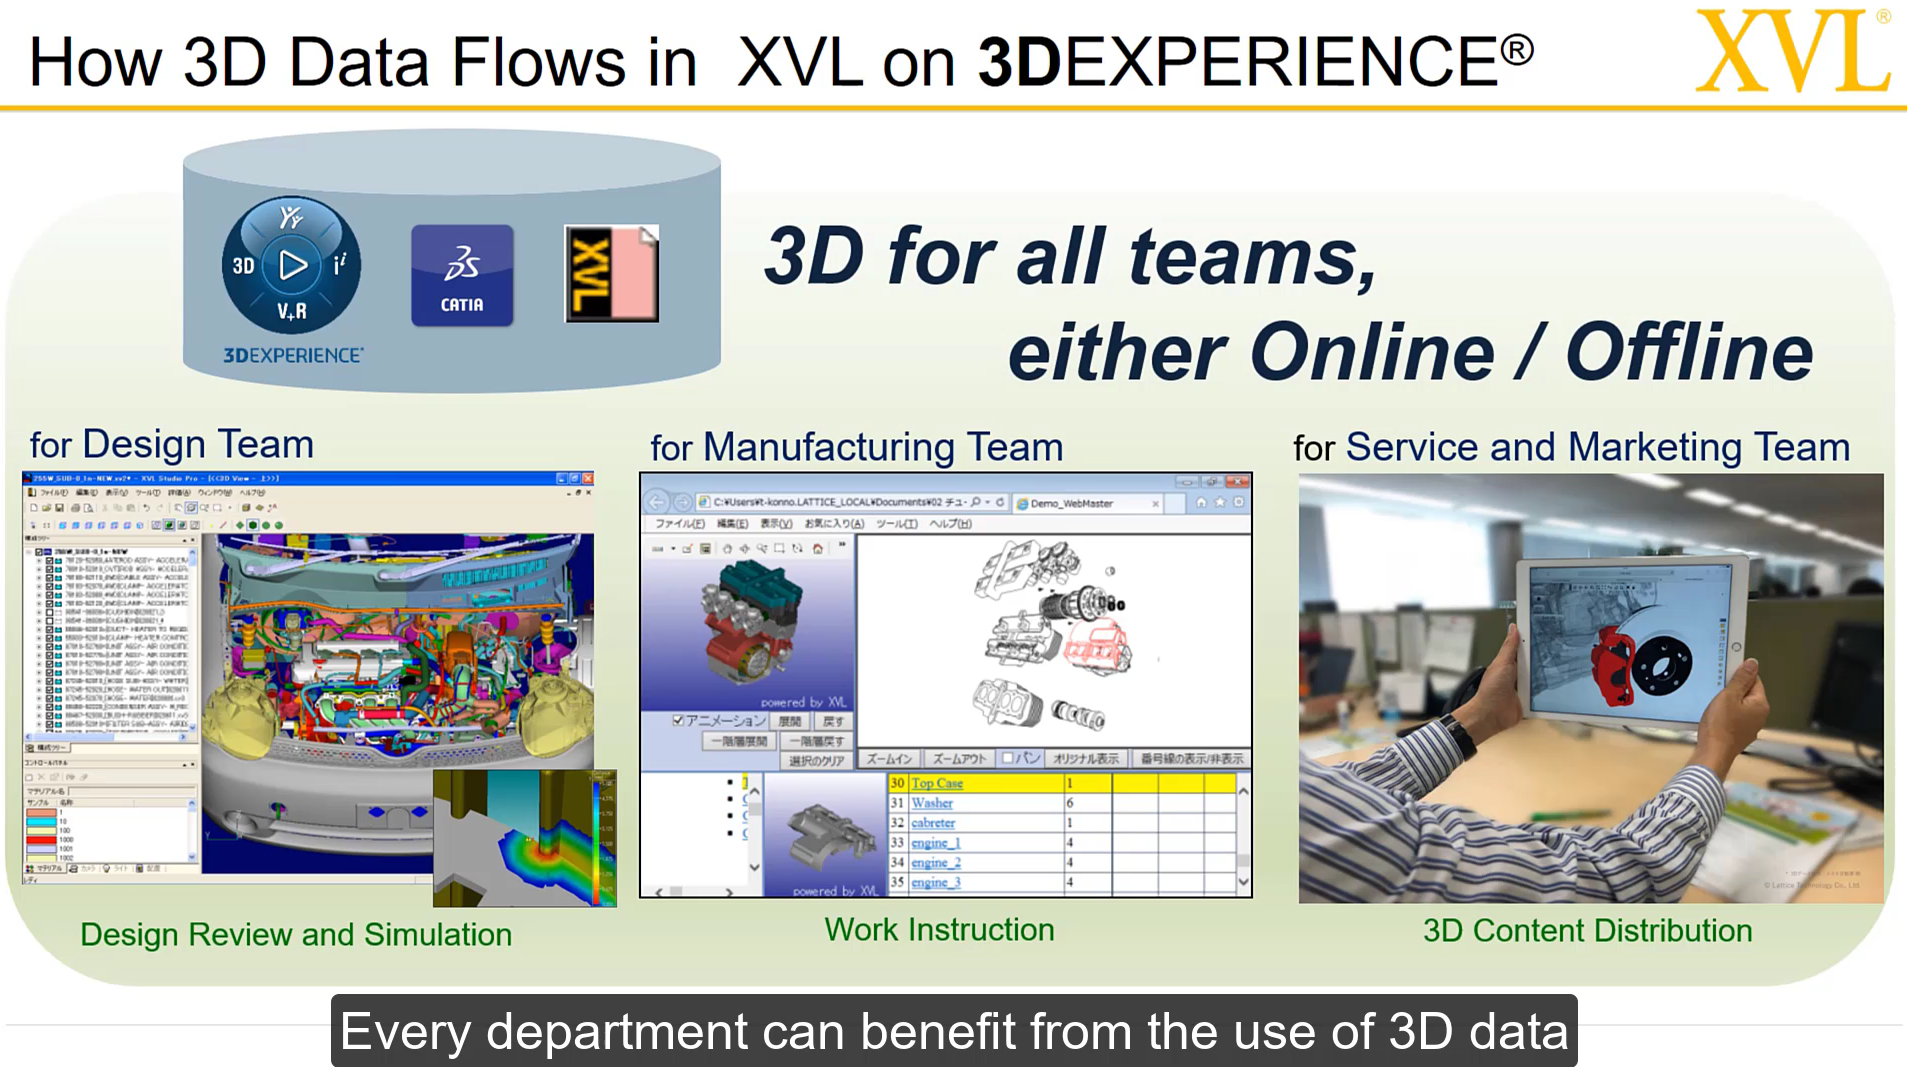 3DEXPERIENCE Supports XVL Natively